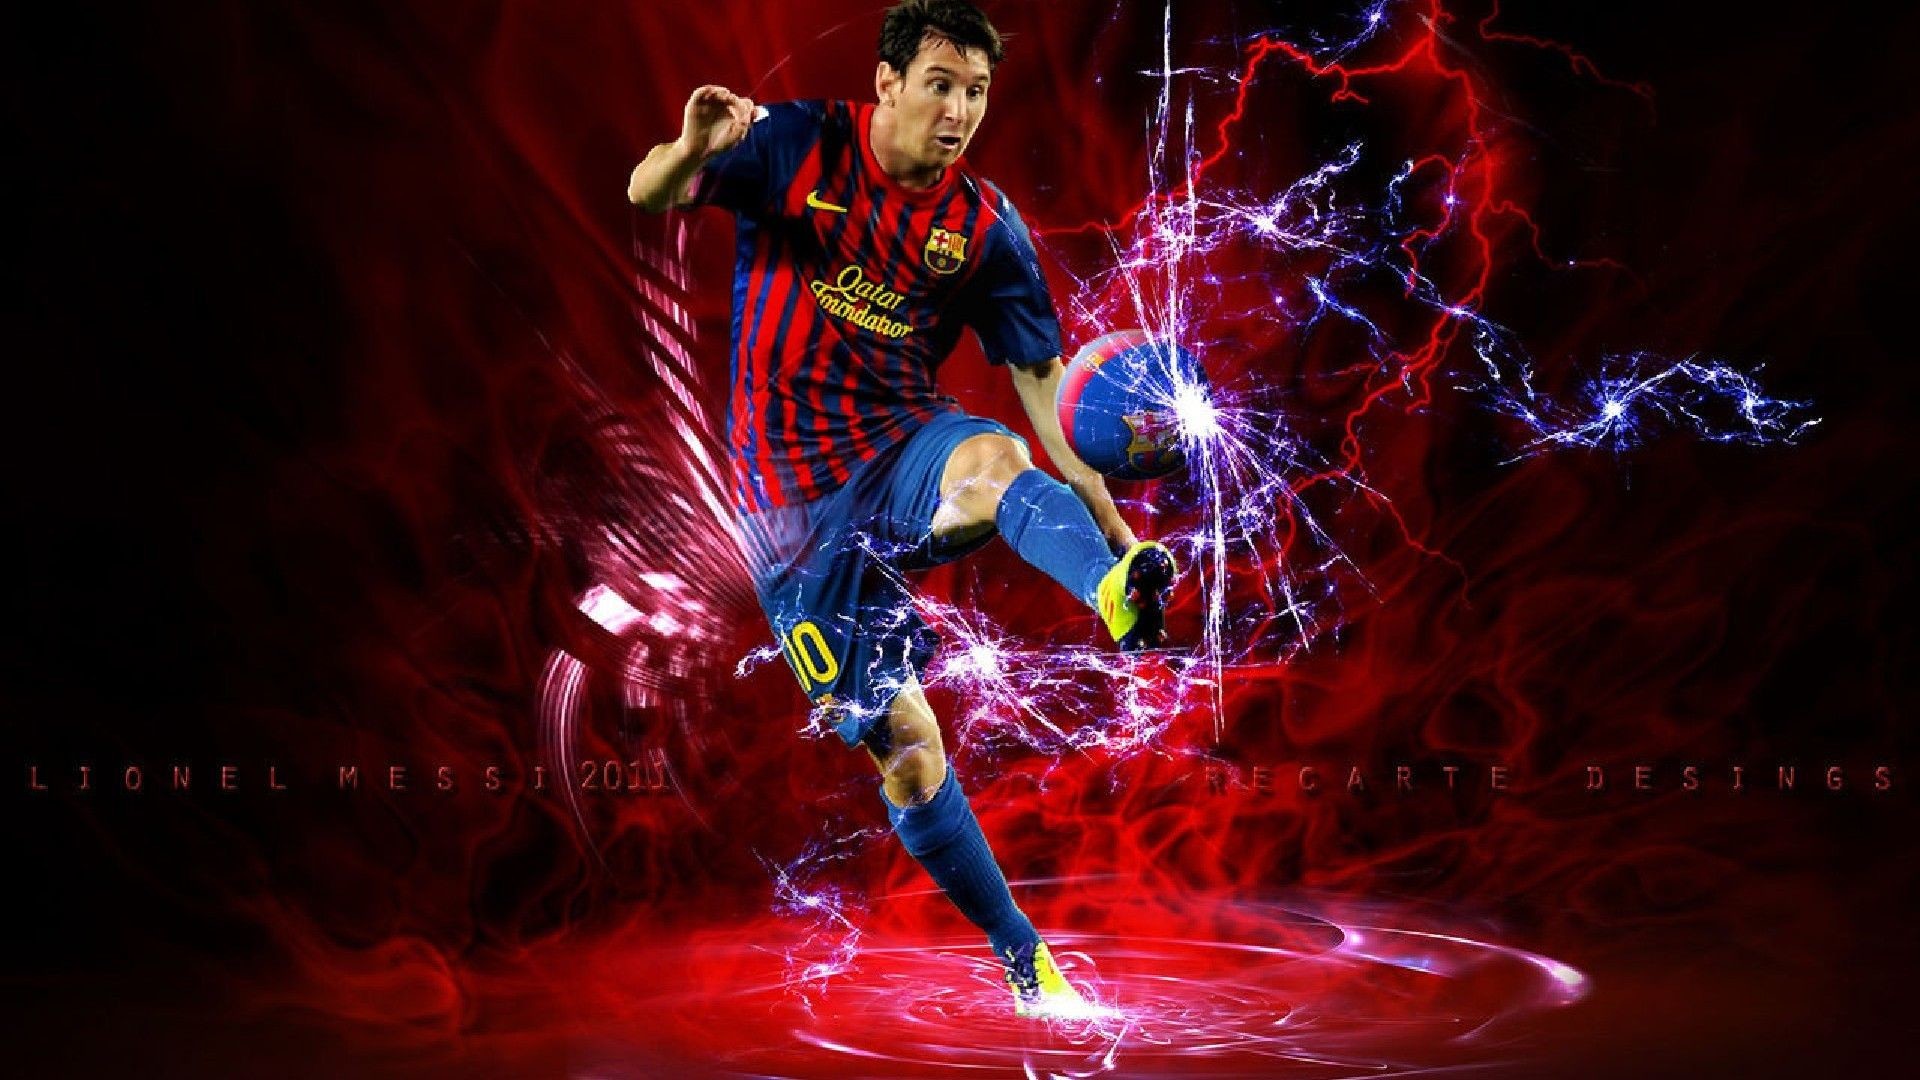 1920x1080 Barcelona Messi Wallpapers Images